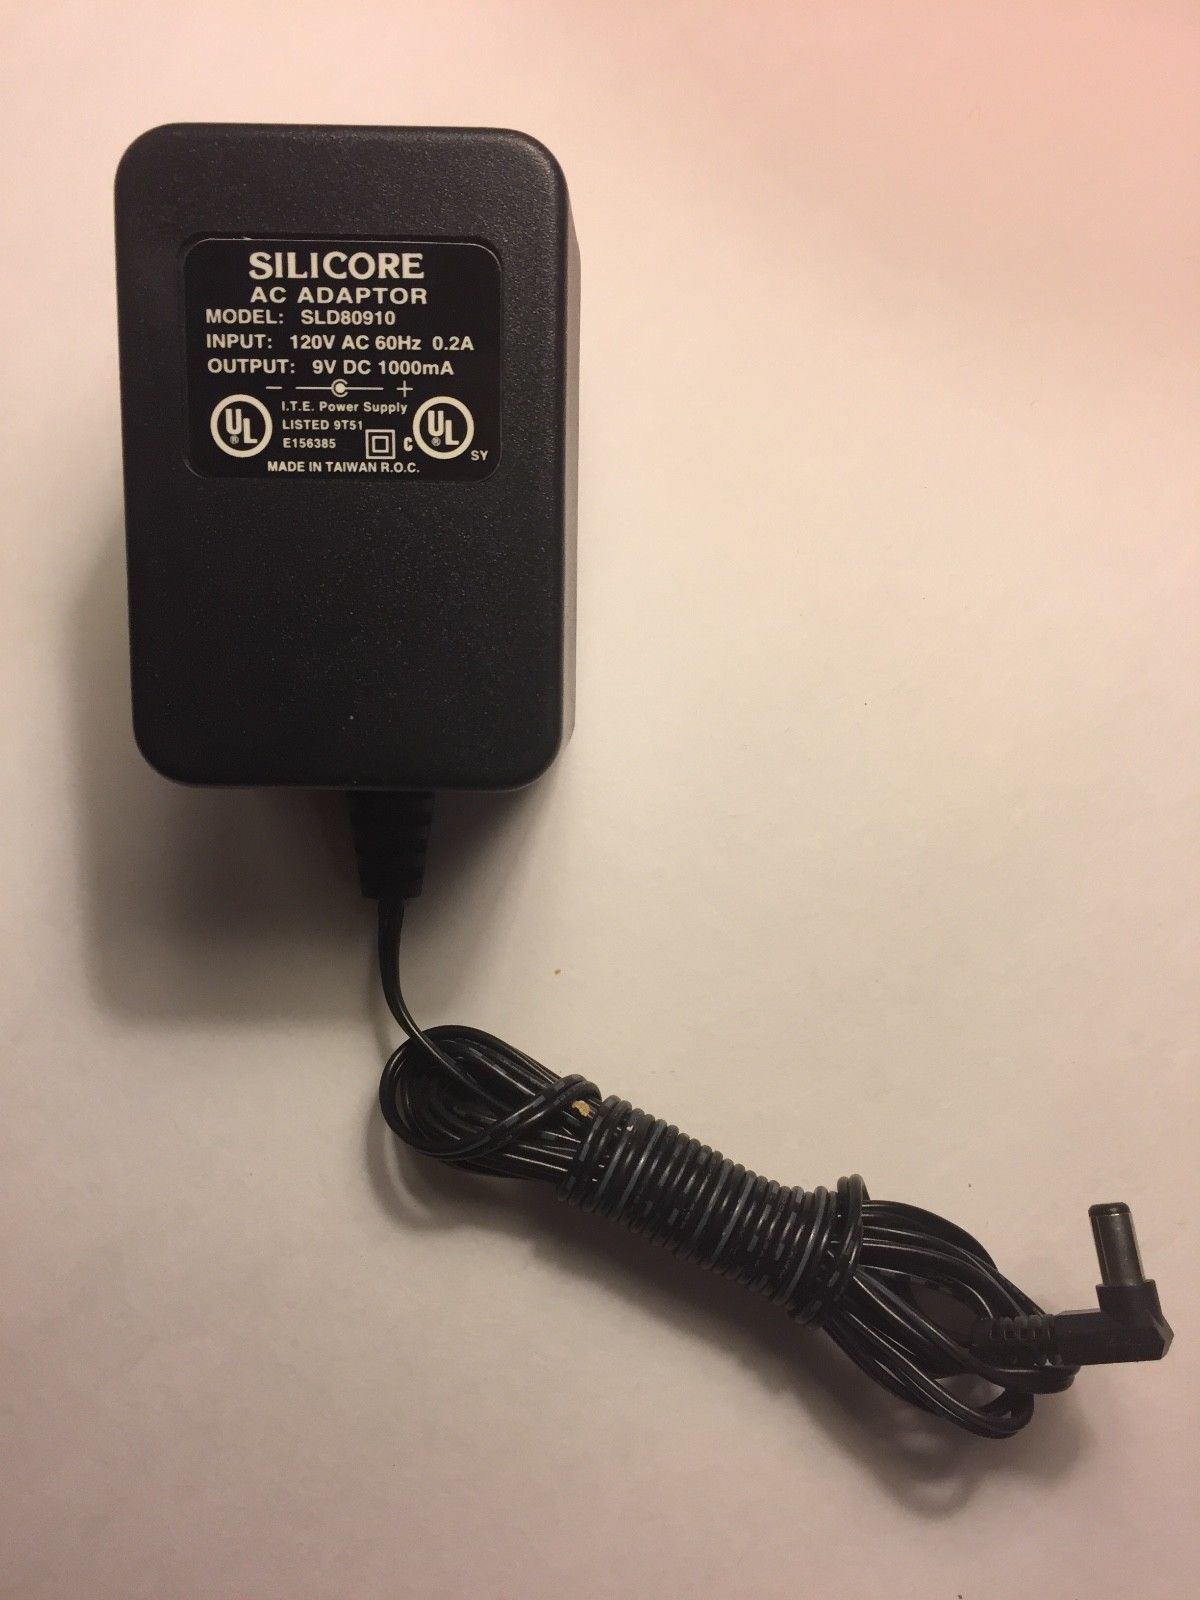 Silicore AC Adapter, Model SLD80910 Input:120VAC 60 Hz 0.2A Output: 9VDC 1A Brand: Silicore Output Voltage: 9 V Mode